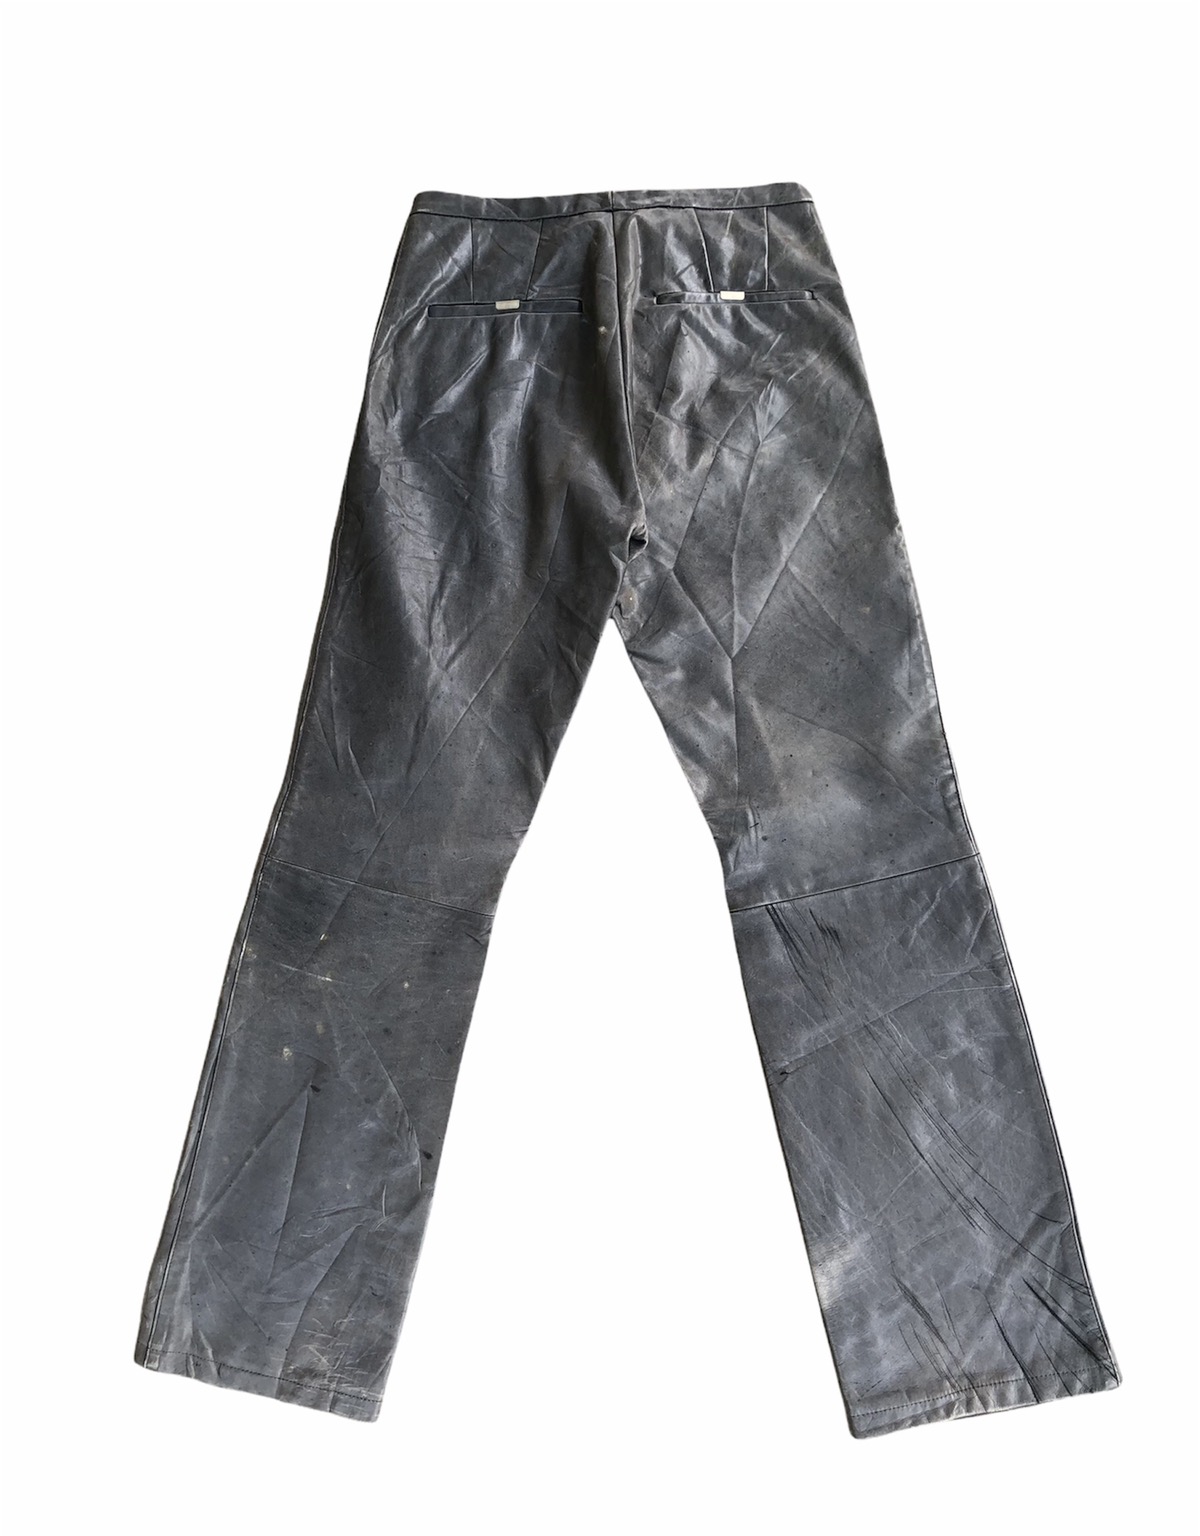 🔥CAROL CHRISTIAN POELL FALL 00-01 LEATHER TROUSER - 3